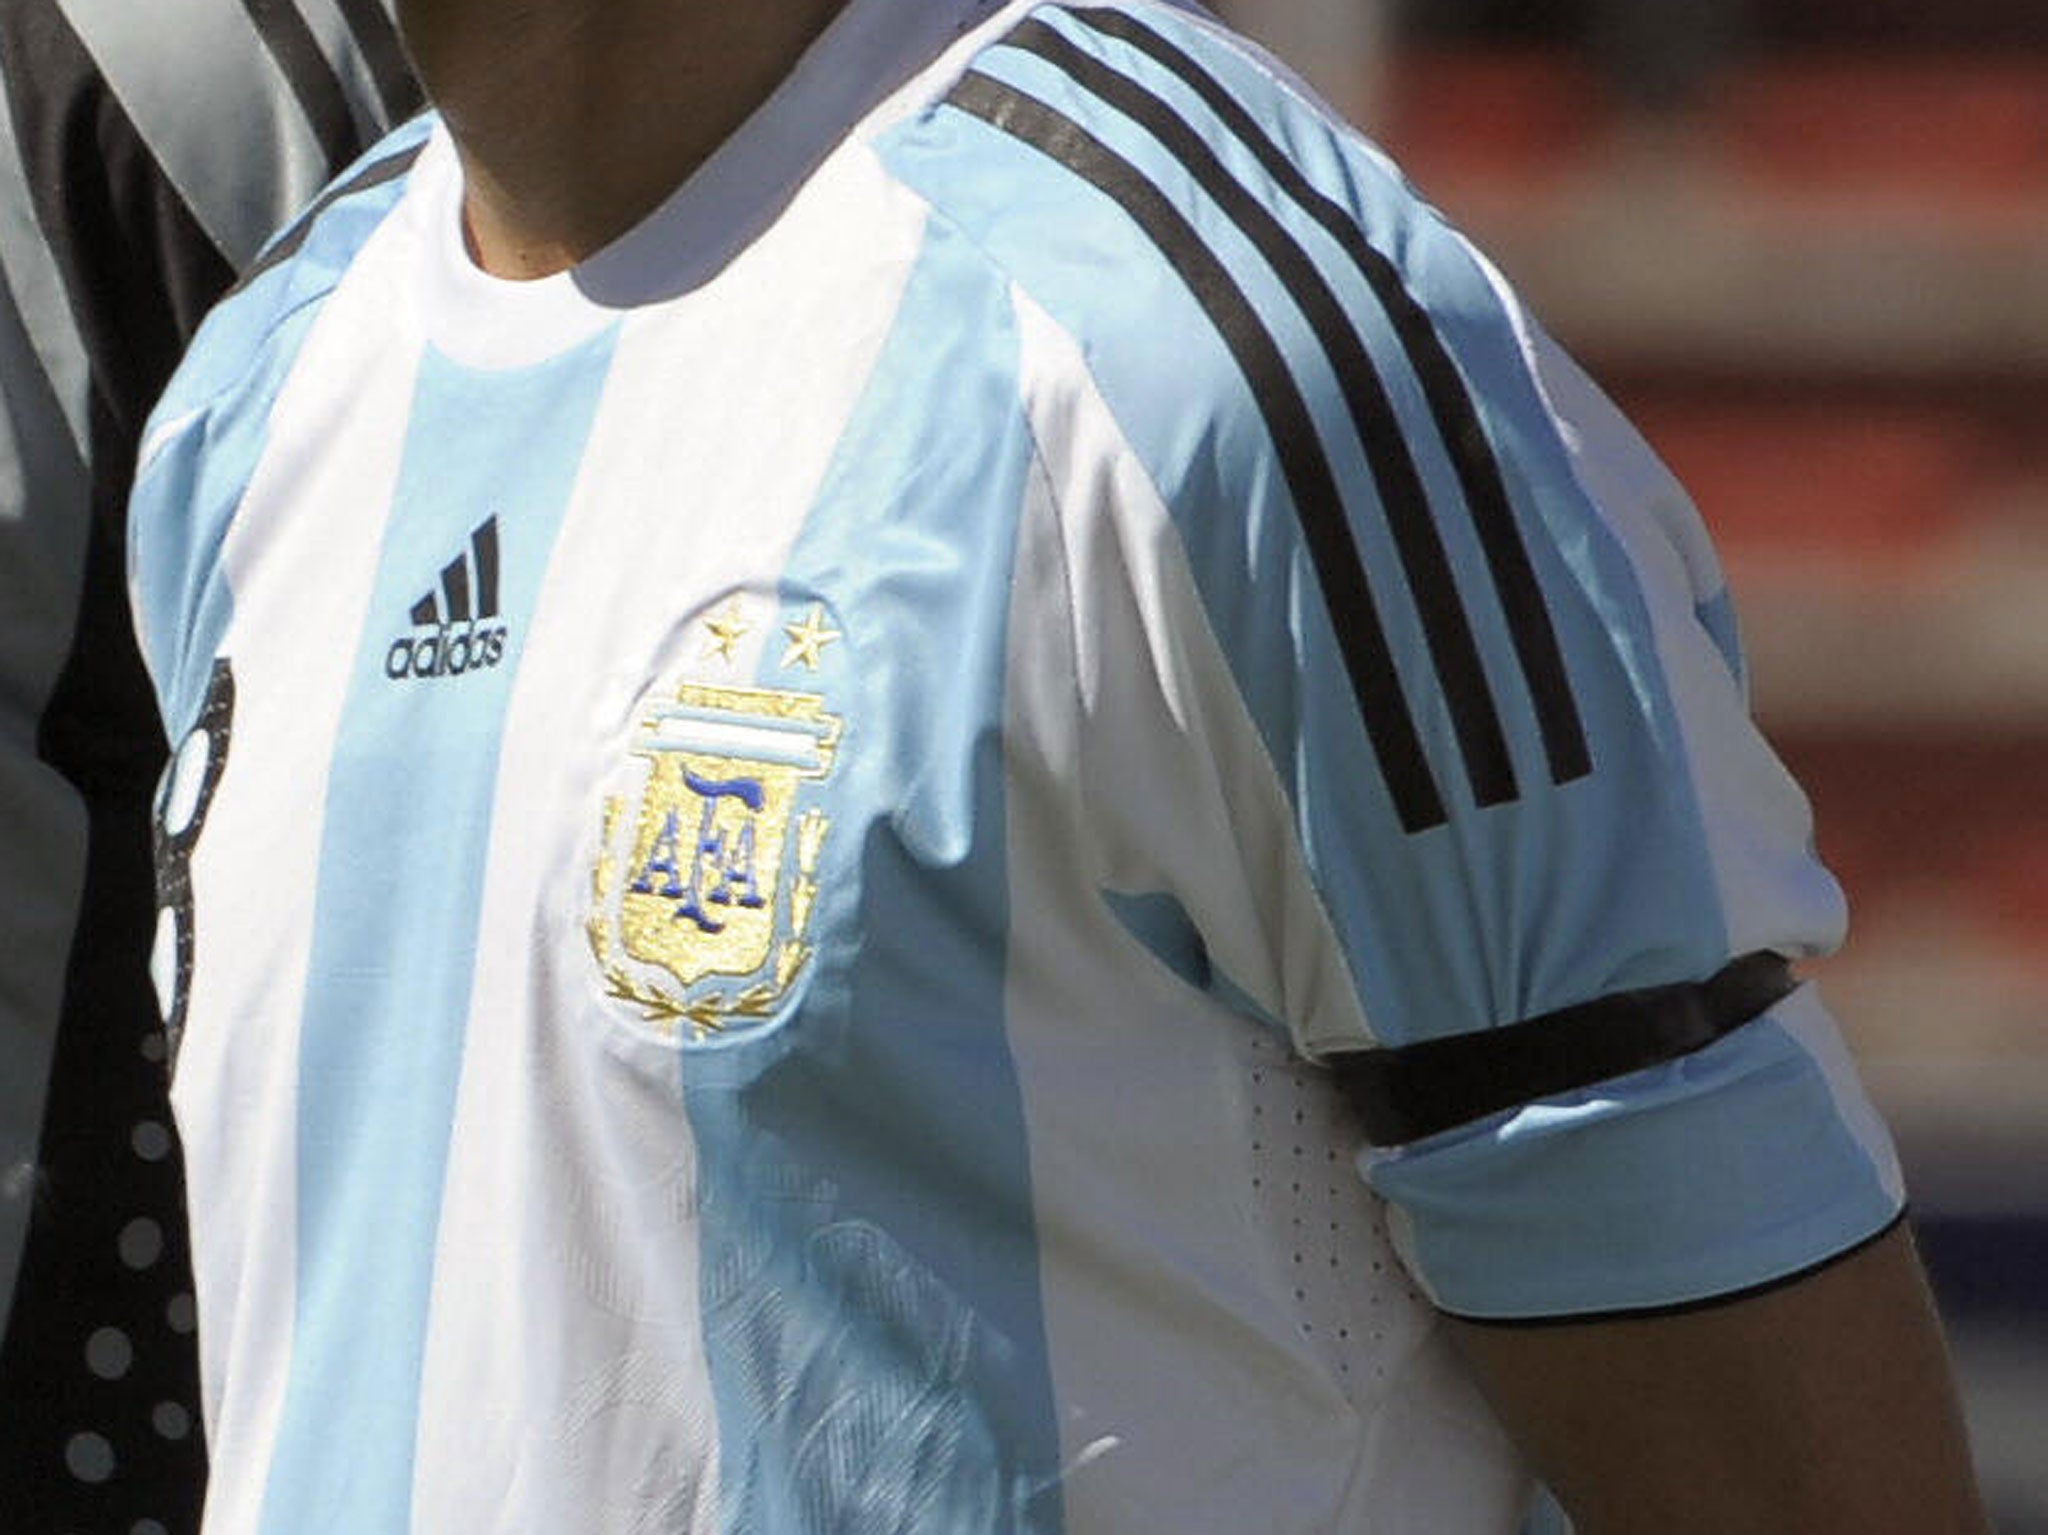 The Argentina team will wear black armbands for tonight's World Cup semi-final with the Netherlands